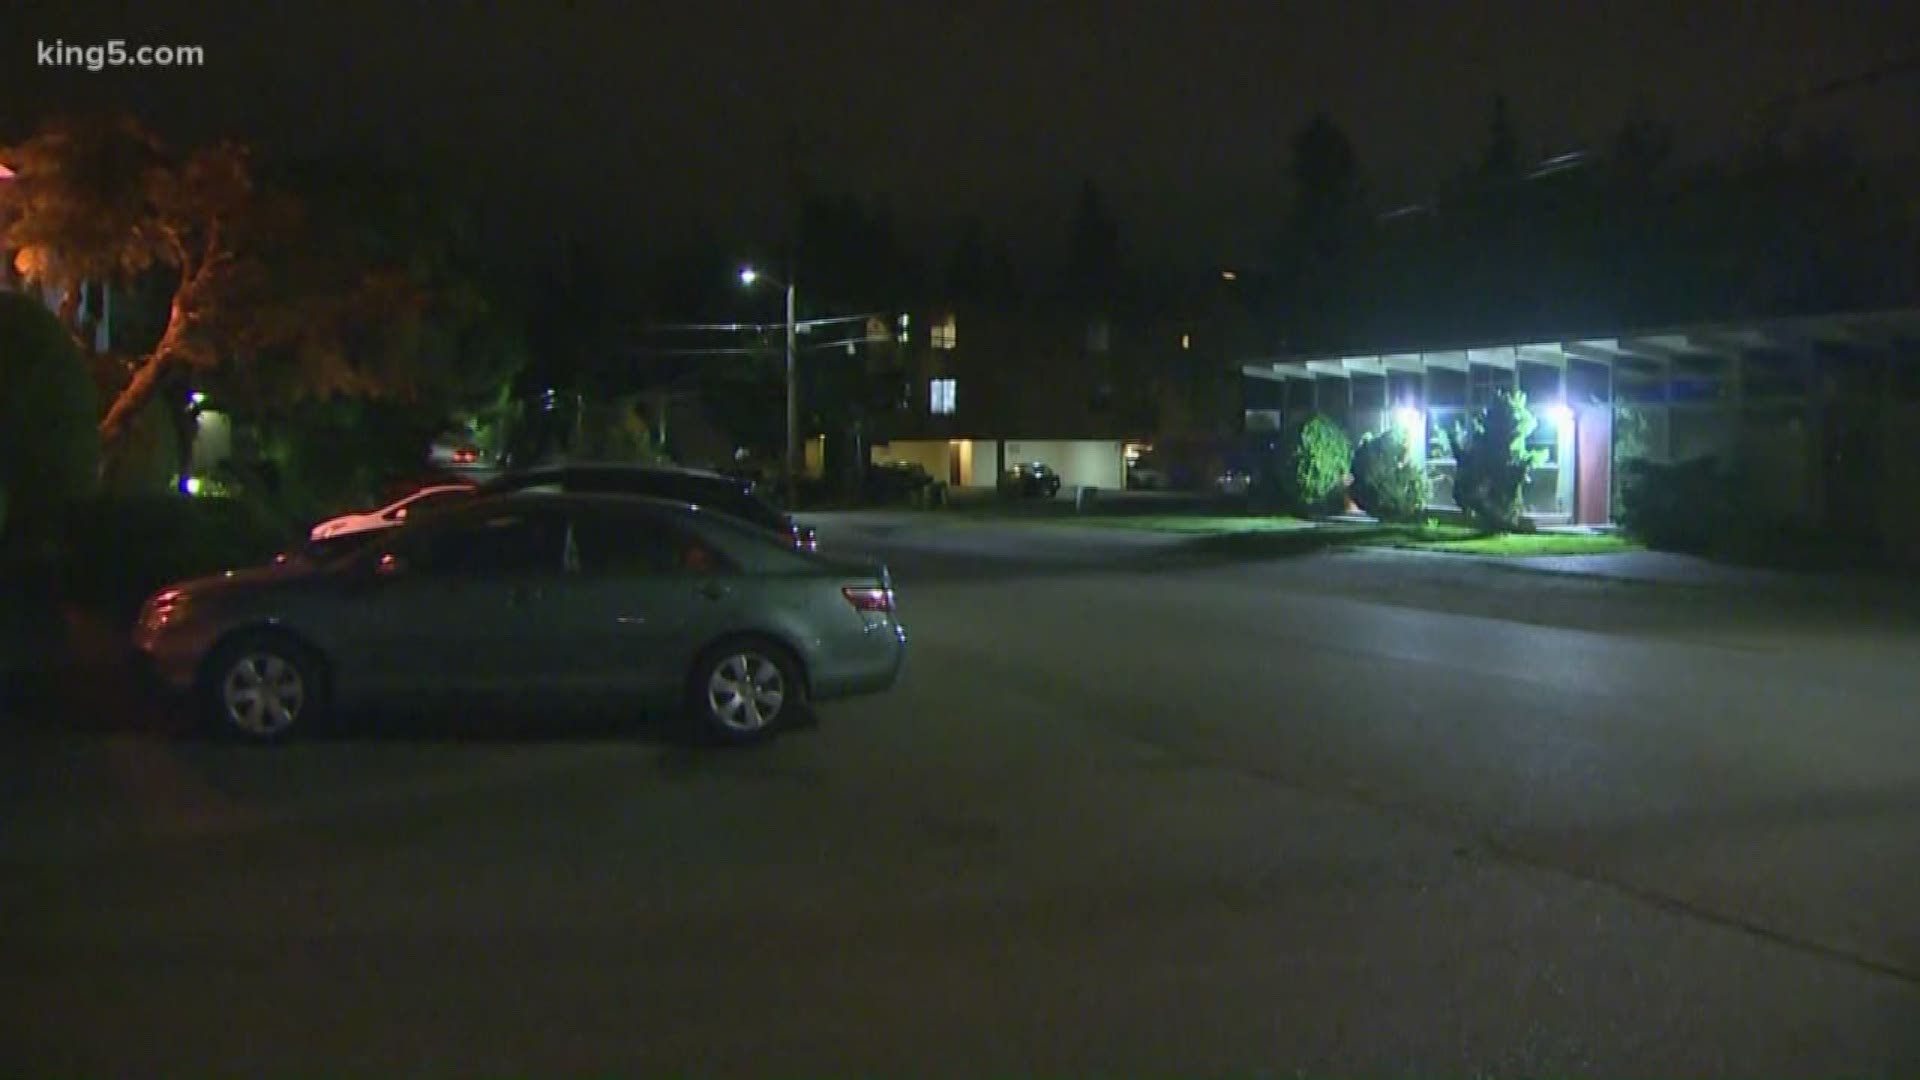 Seattle police continue to look for two people who they say stole a car with two kids still inside it in the Maple Leaf area Wednesday. The kids were found safe.